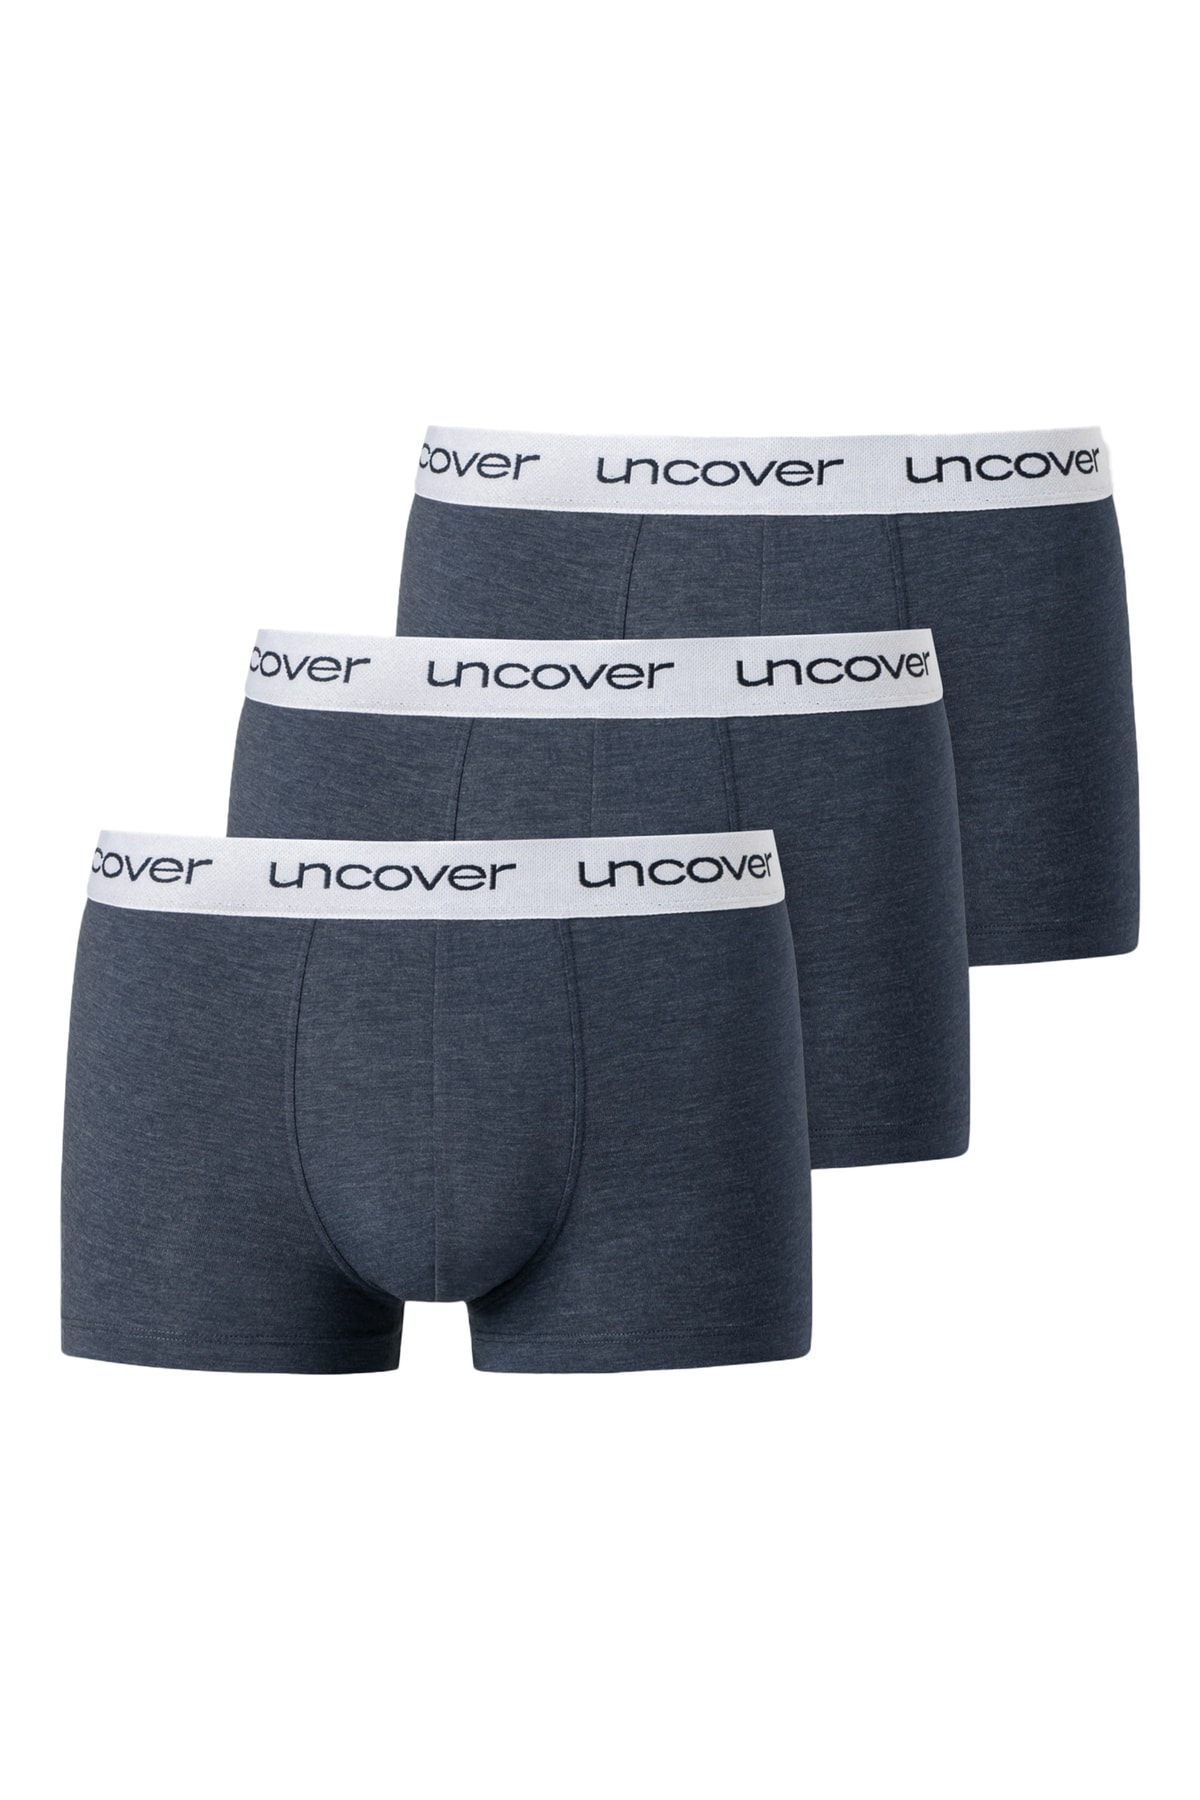 uncover by Schiesser Boxershorts Blau 3er-Pack